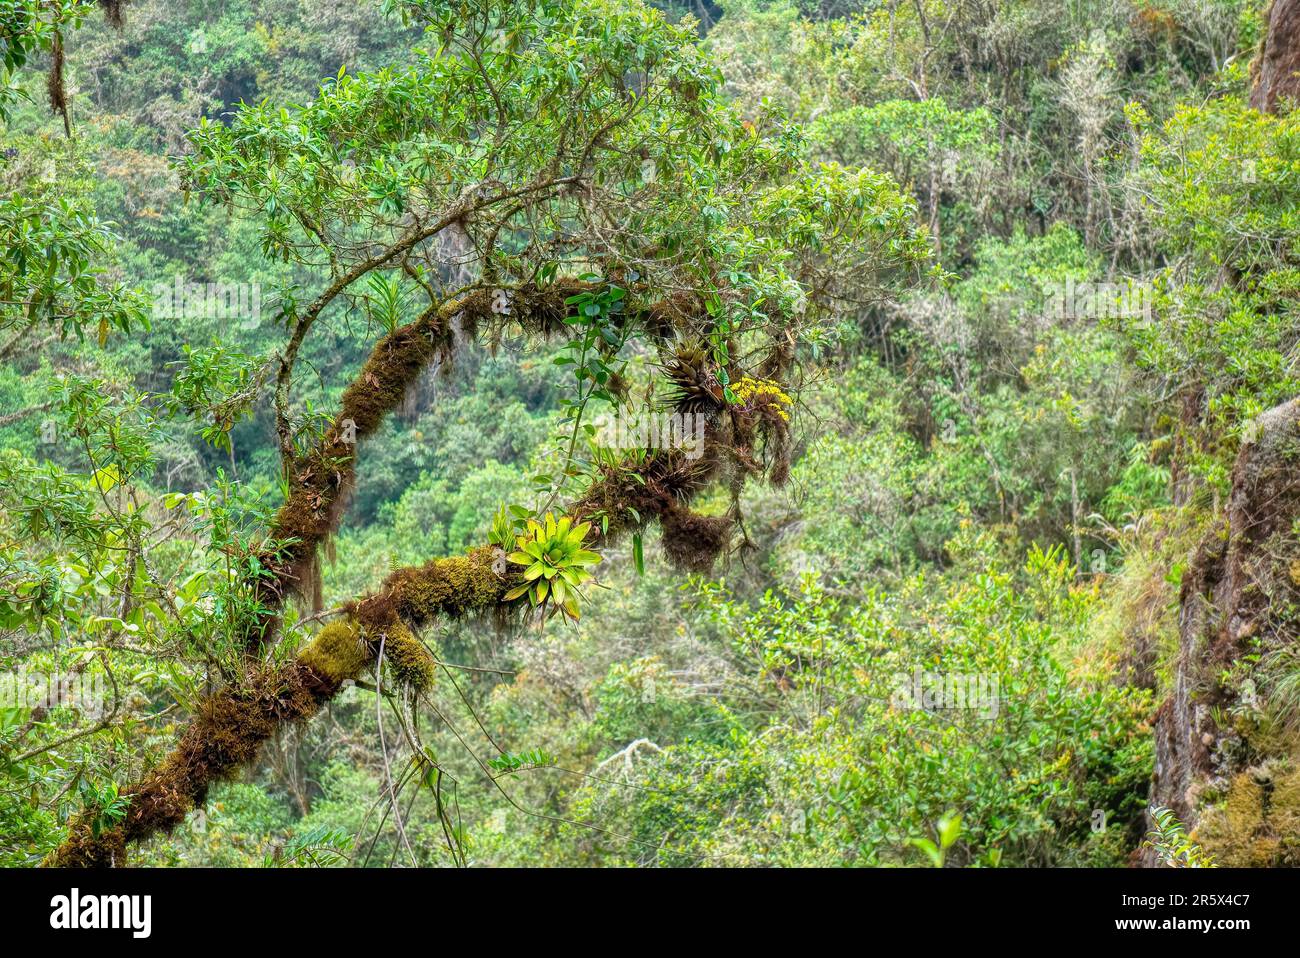 In Manu National Park, Peru, a tree branch is covered in moss, bromeliads and wild orchids, which are epiphytes that thrive in the moist environment. Stock Photo